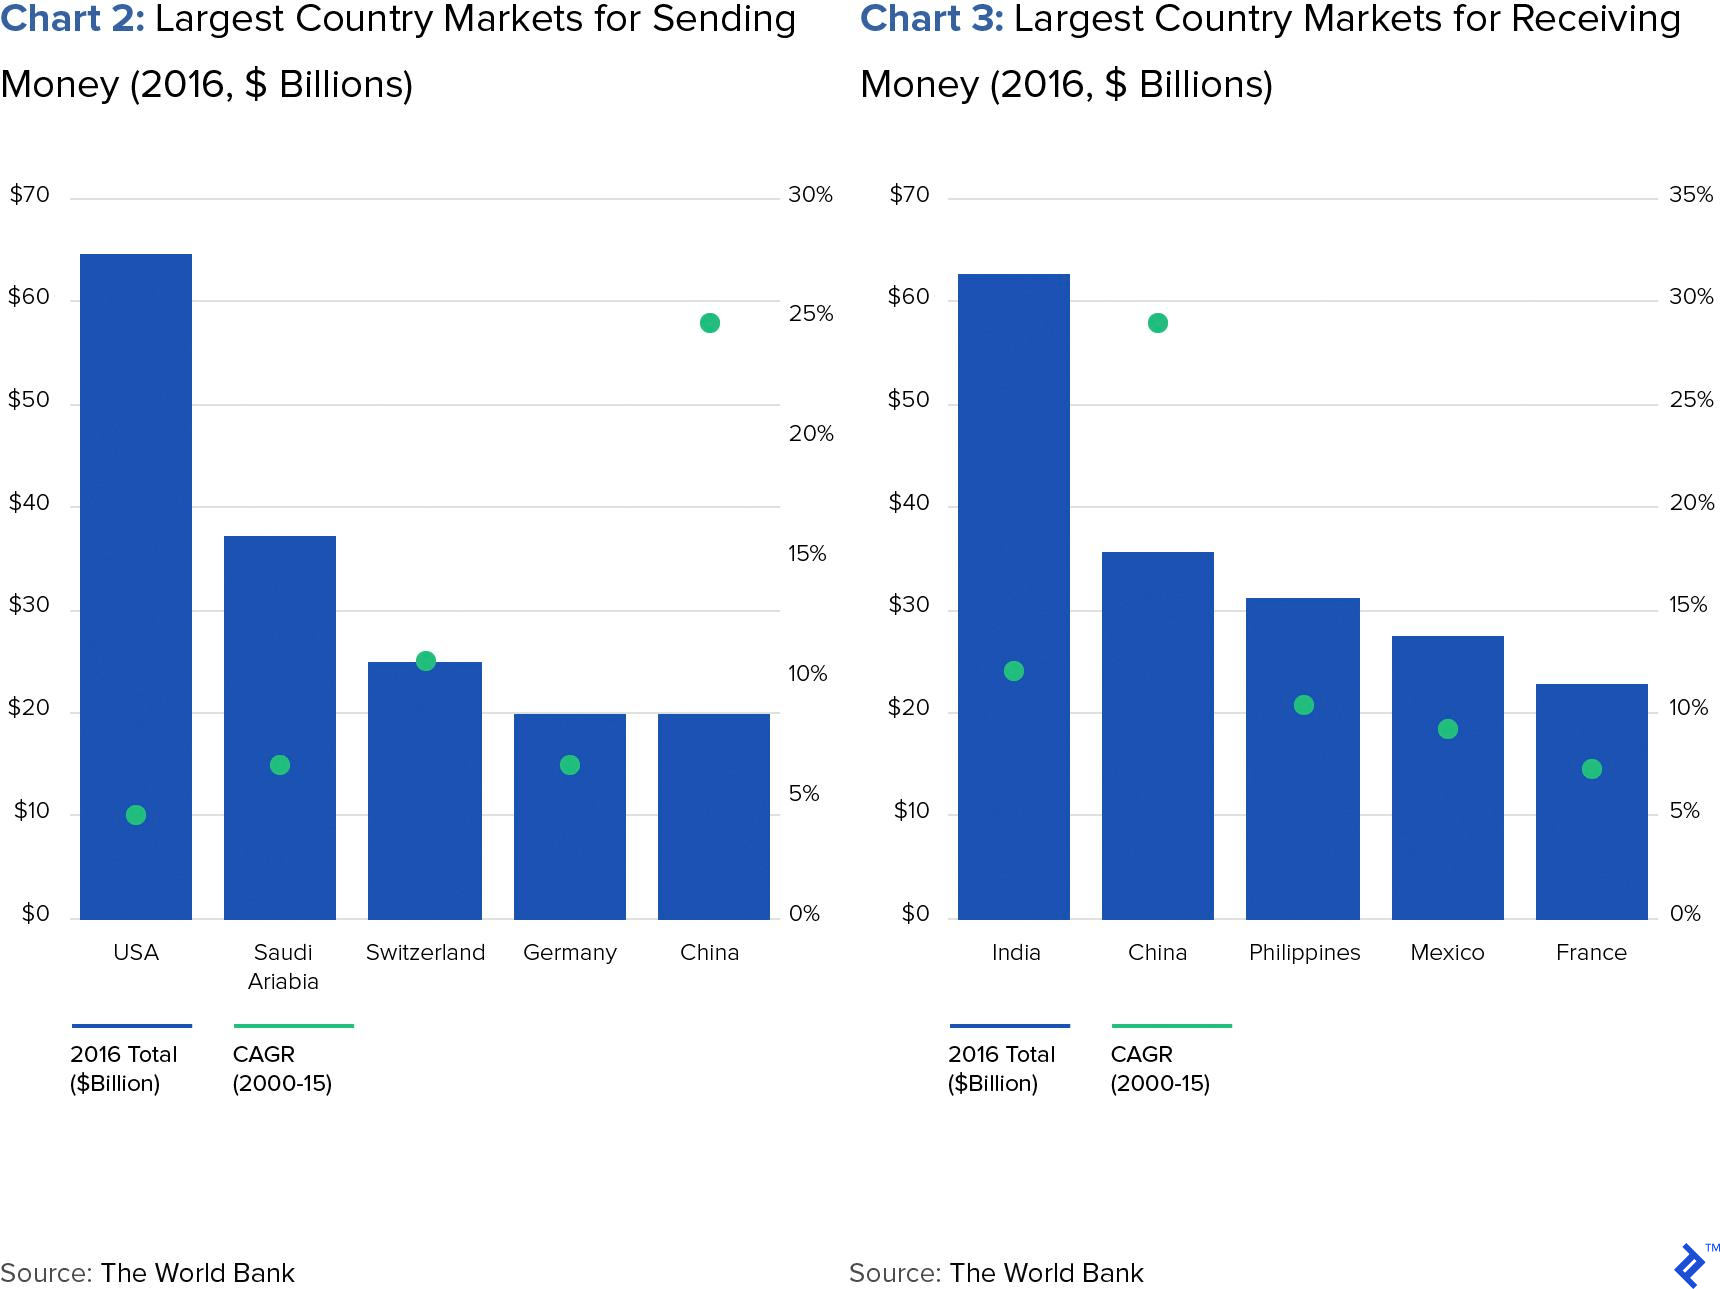 Chart 2: Largest Country Markets for Sending Money (2016, $ Billions) and Chart 3: Largest Country Markets for Receiving Money (2016, $ Billions)